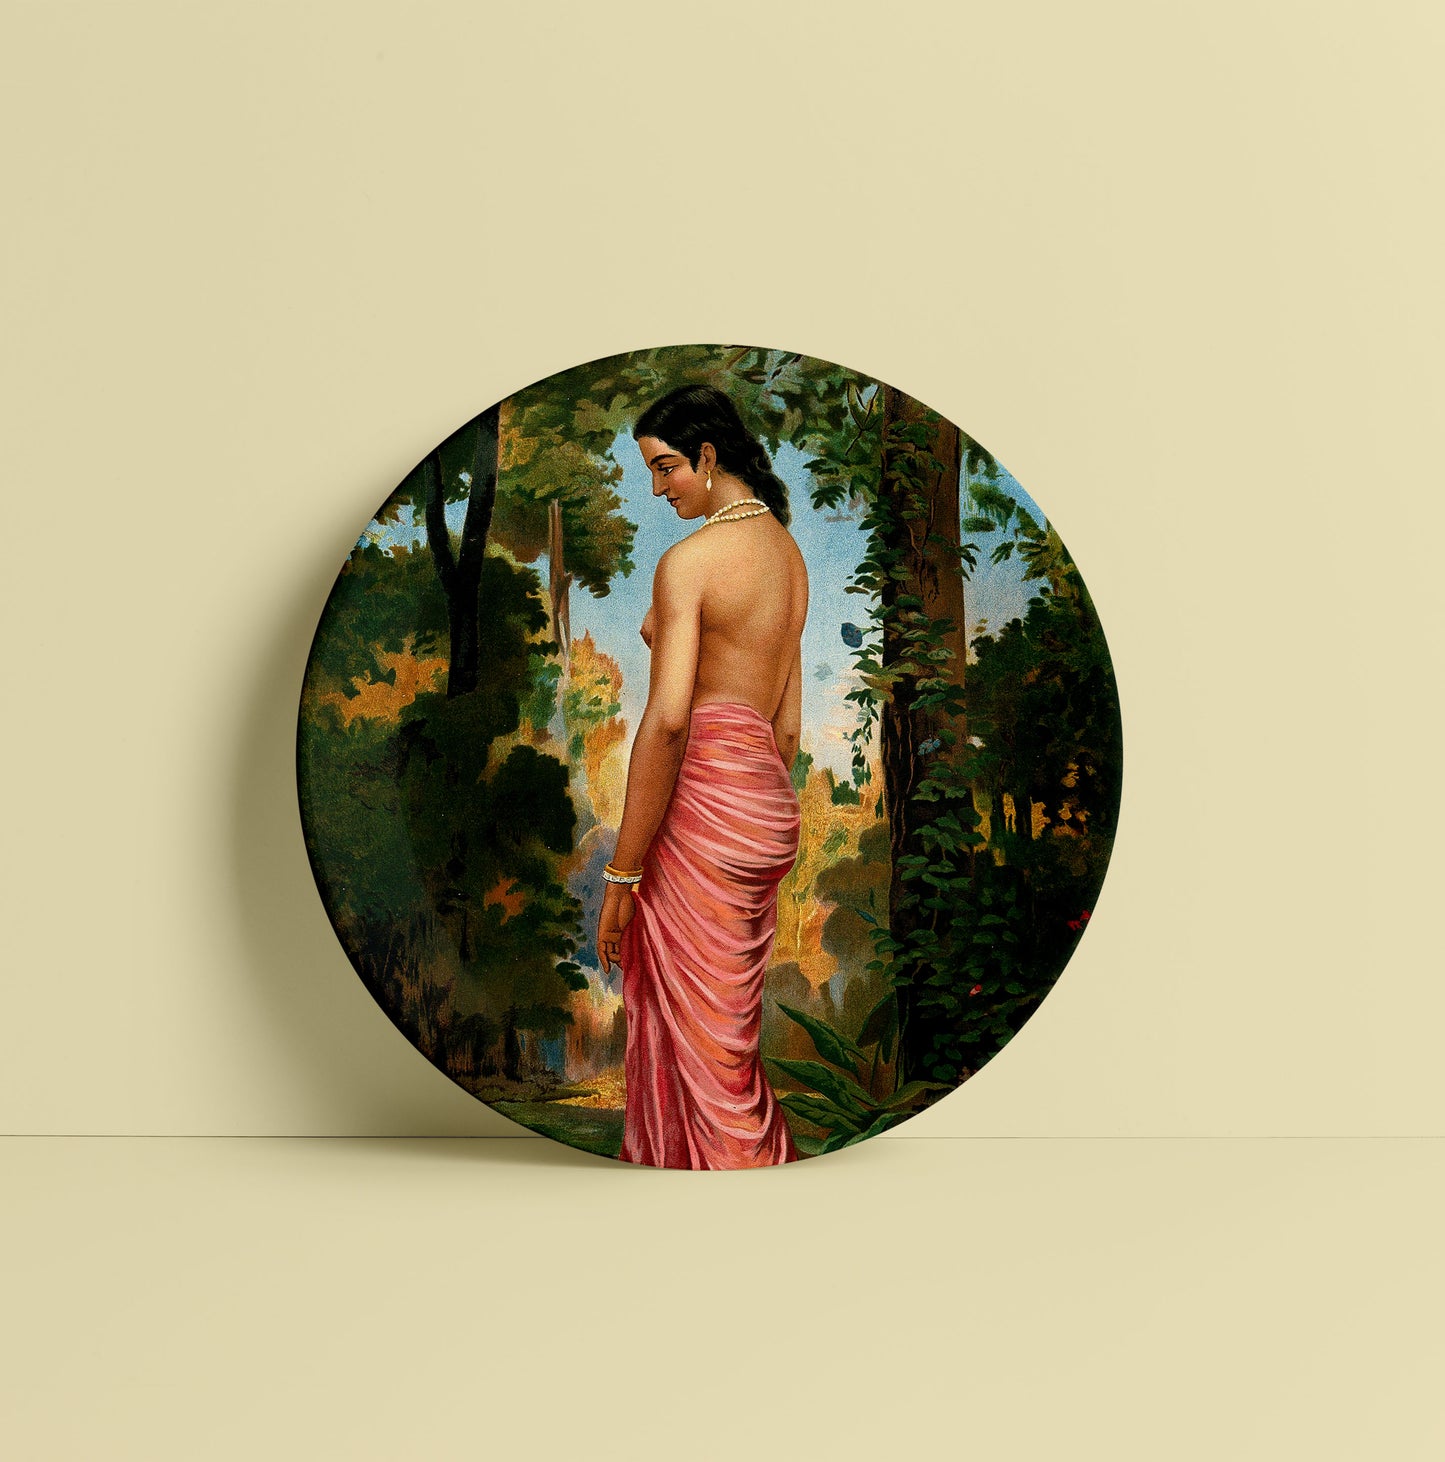 Semi-clothed woman by a river bank called Varini by Ravi Varma Ceramic Plate for Home Decor